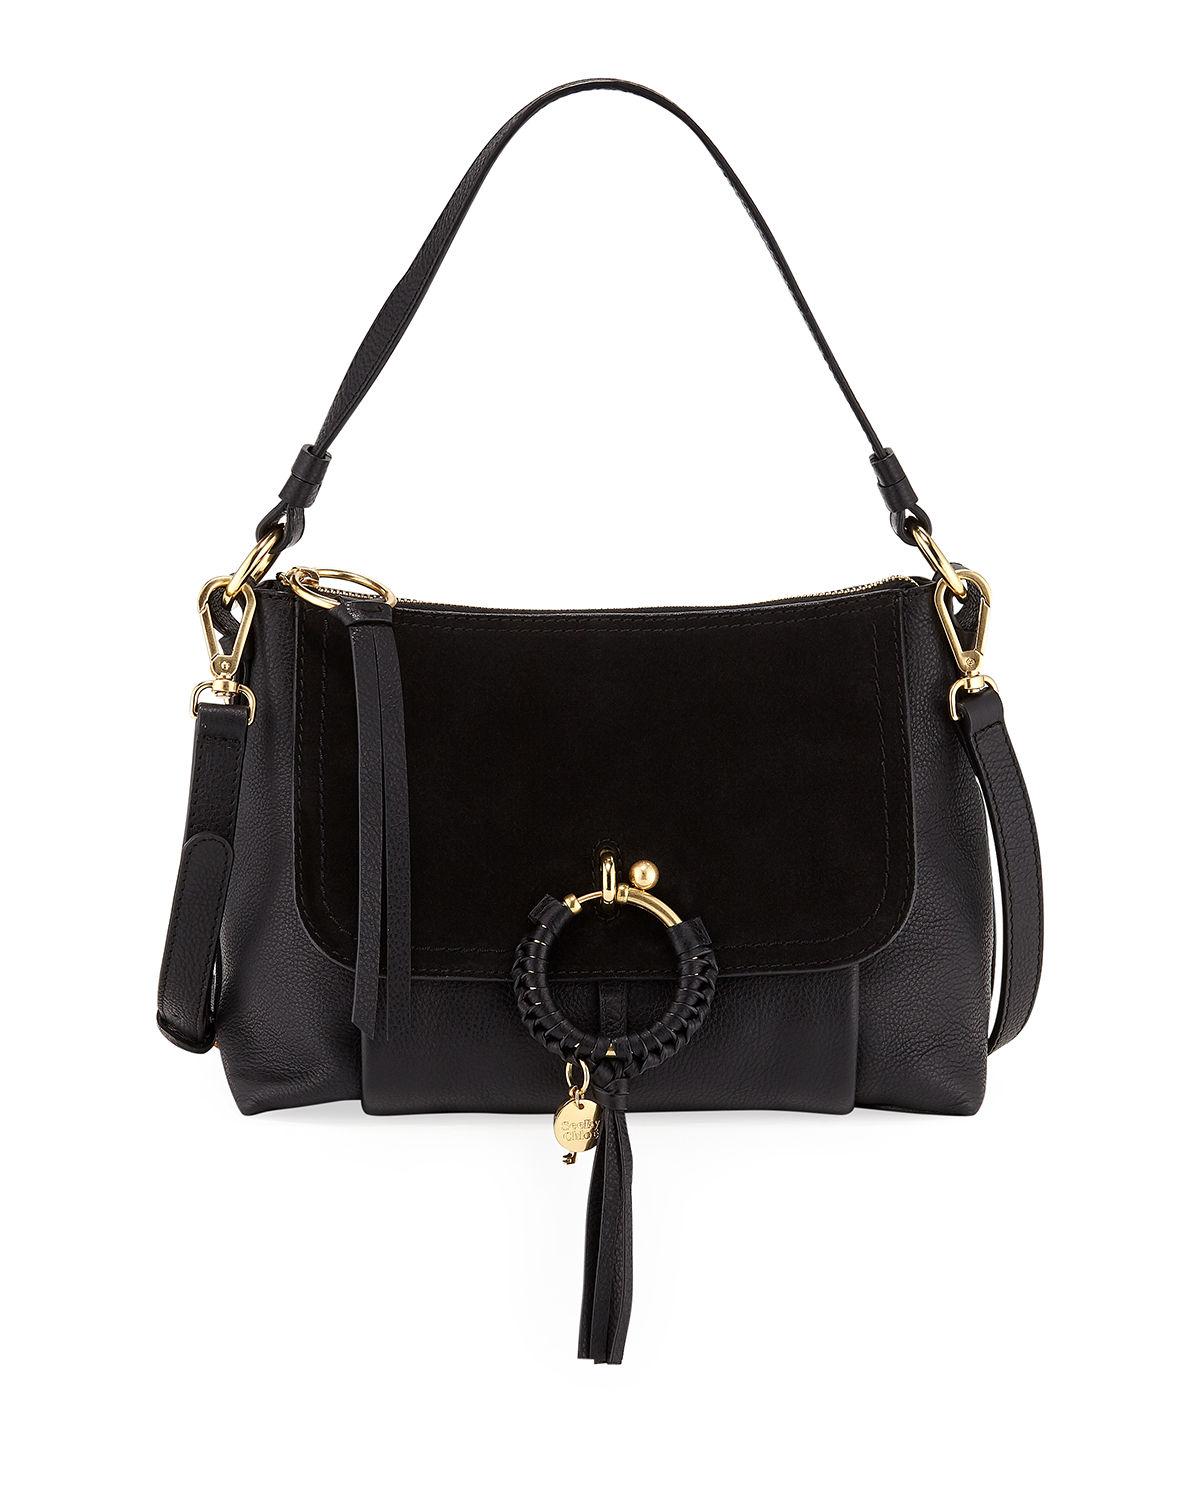 See By Chloé Ring Medium Suede & Leather Shoulder Bag in Black - Lyst